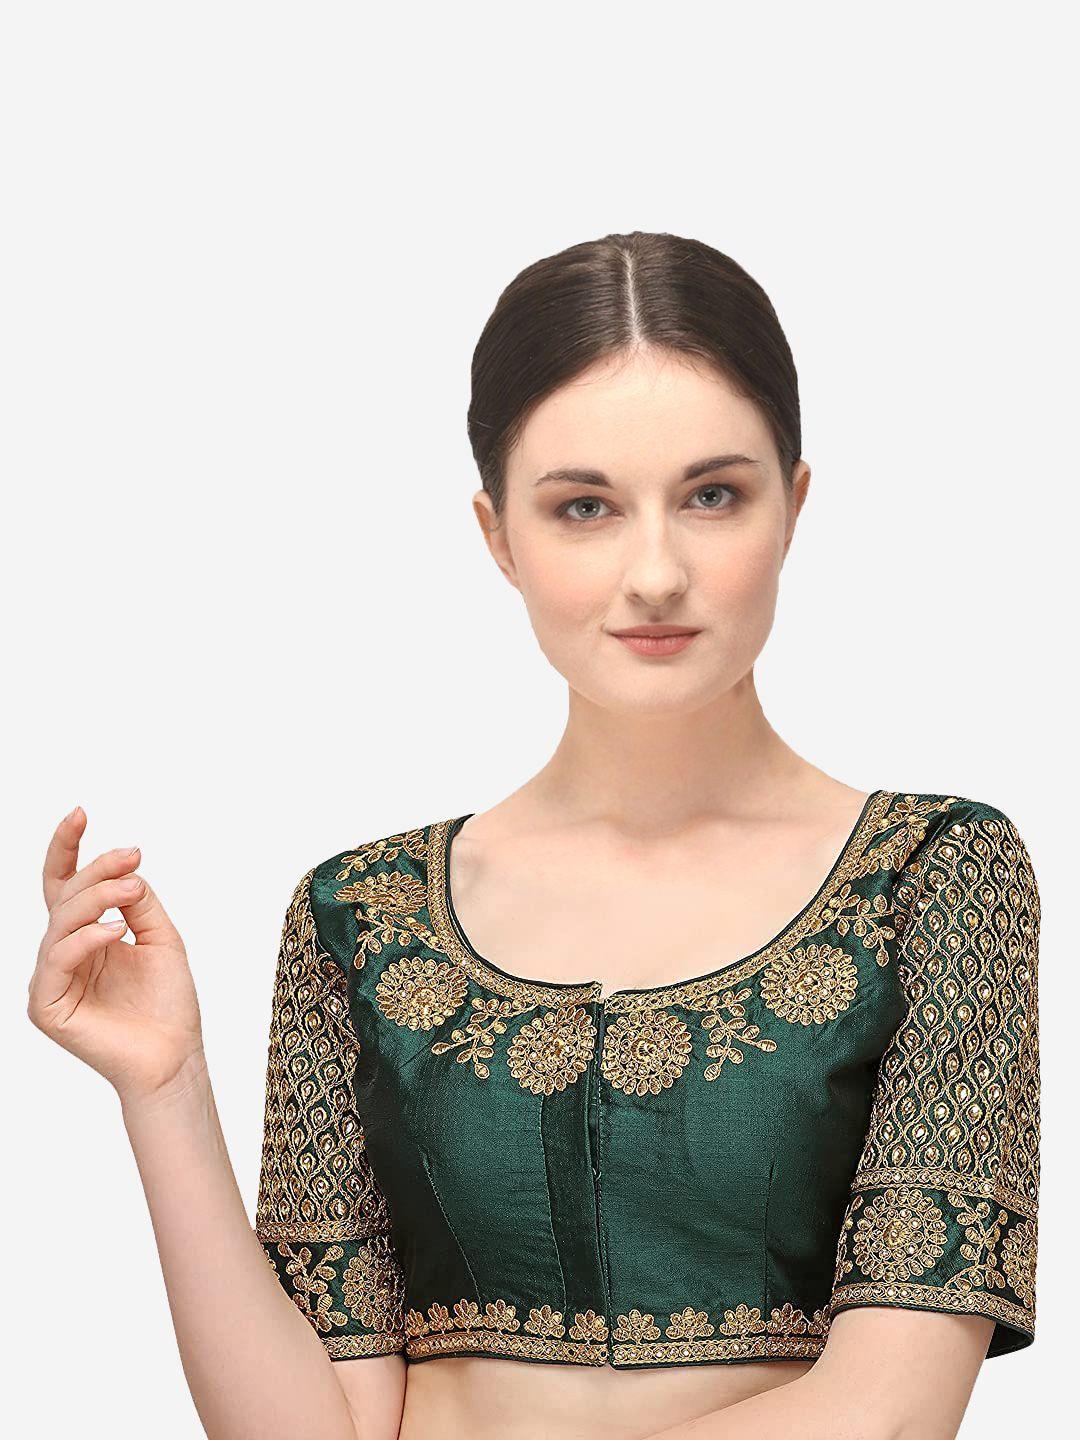 sumaira tex women green & gold-colored embroidered readymade saree blouse